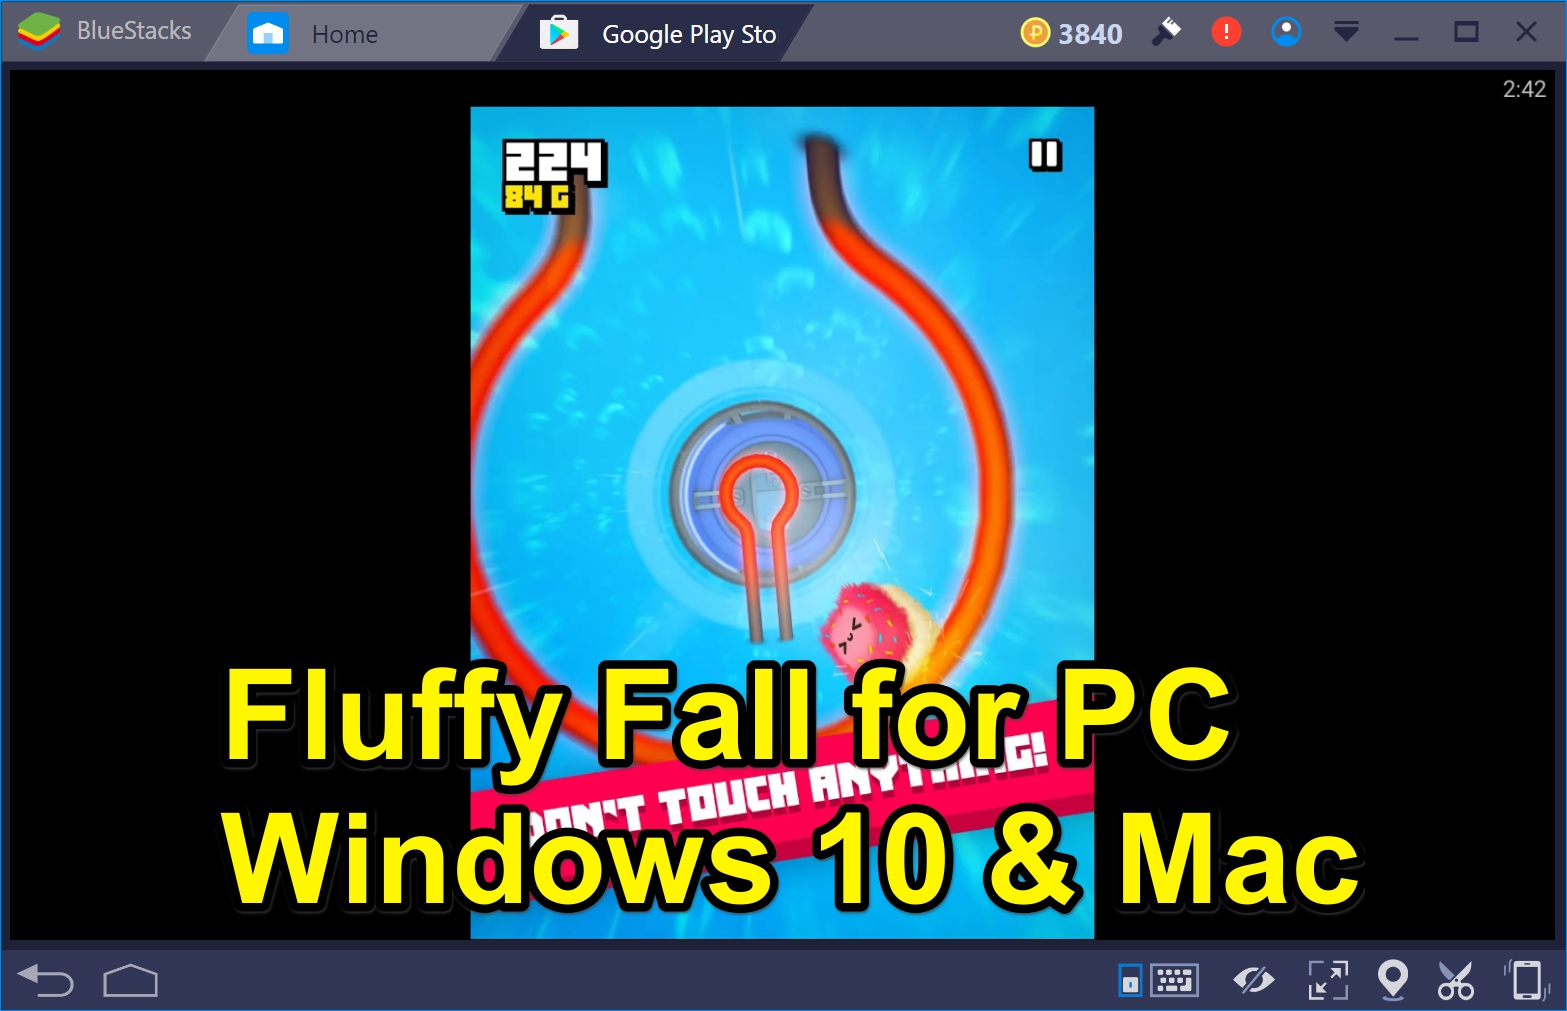 Fluffy Fall for PC Windows 10 Free Download